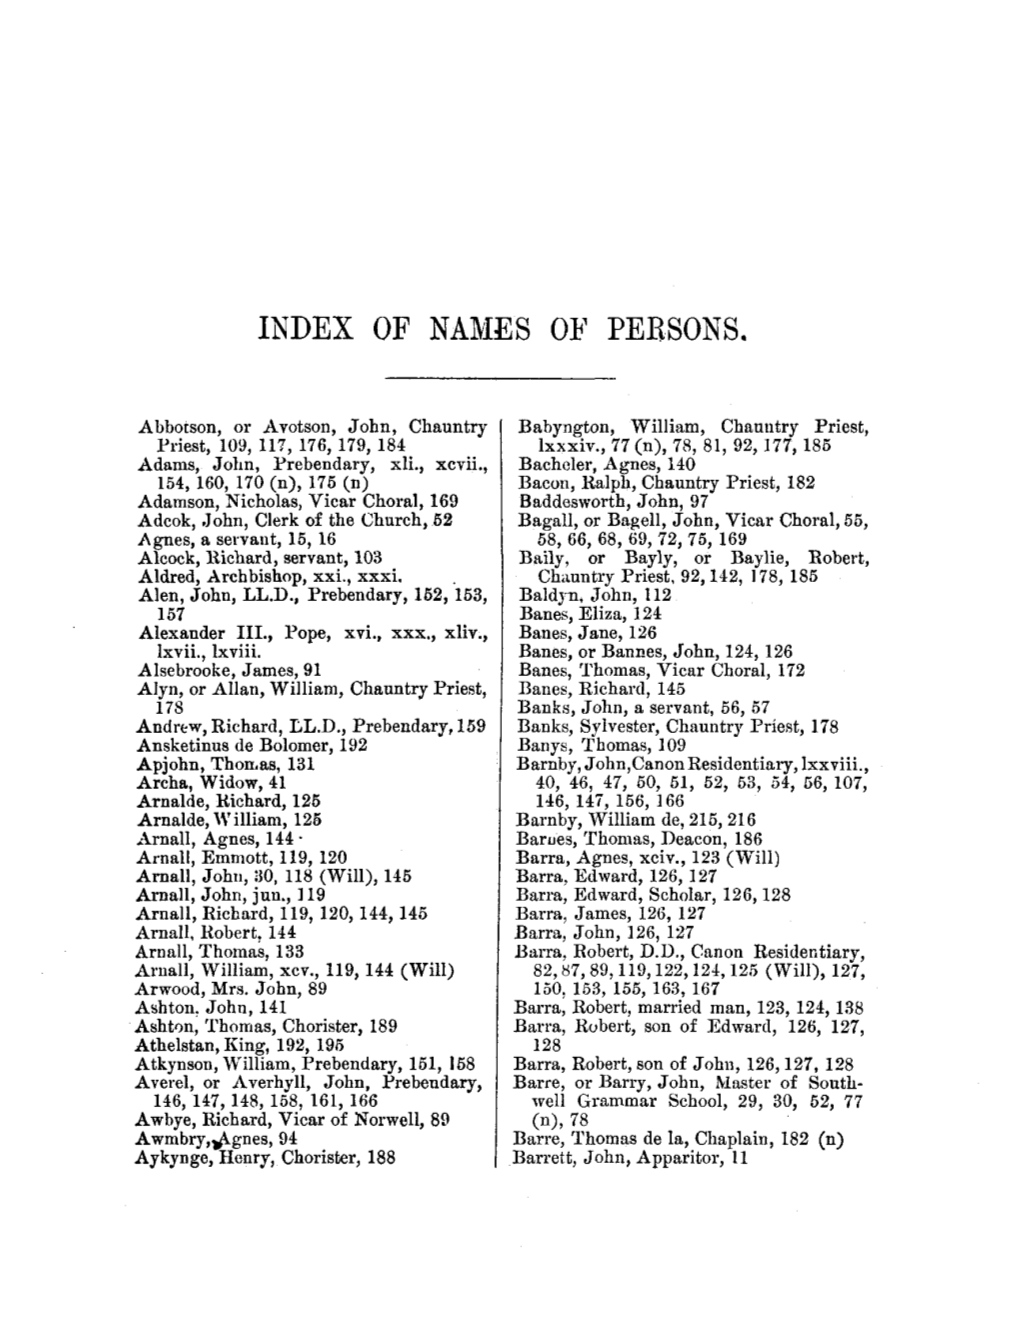 Index of Names of Persons